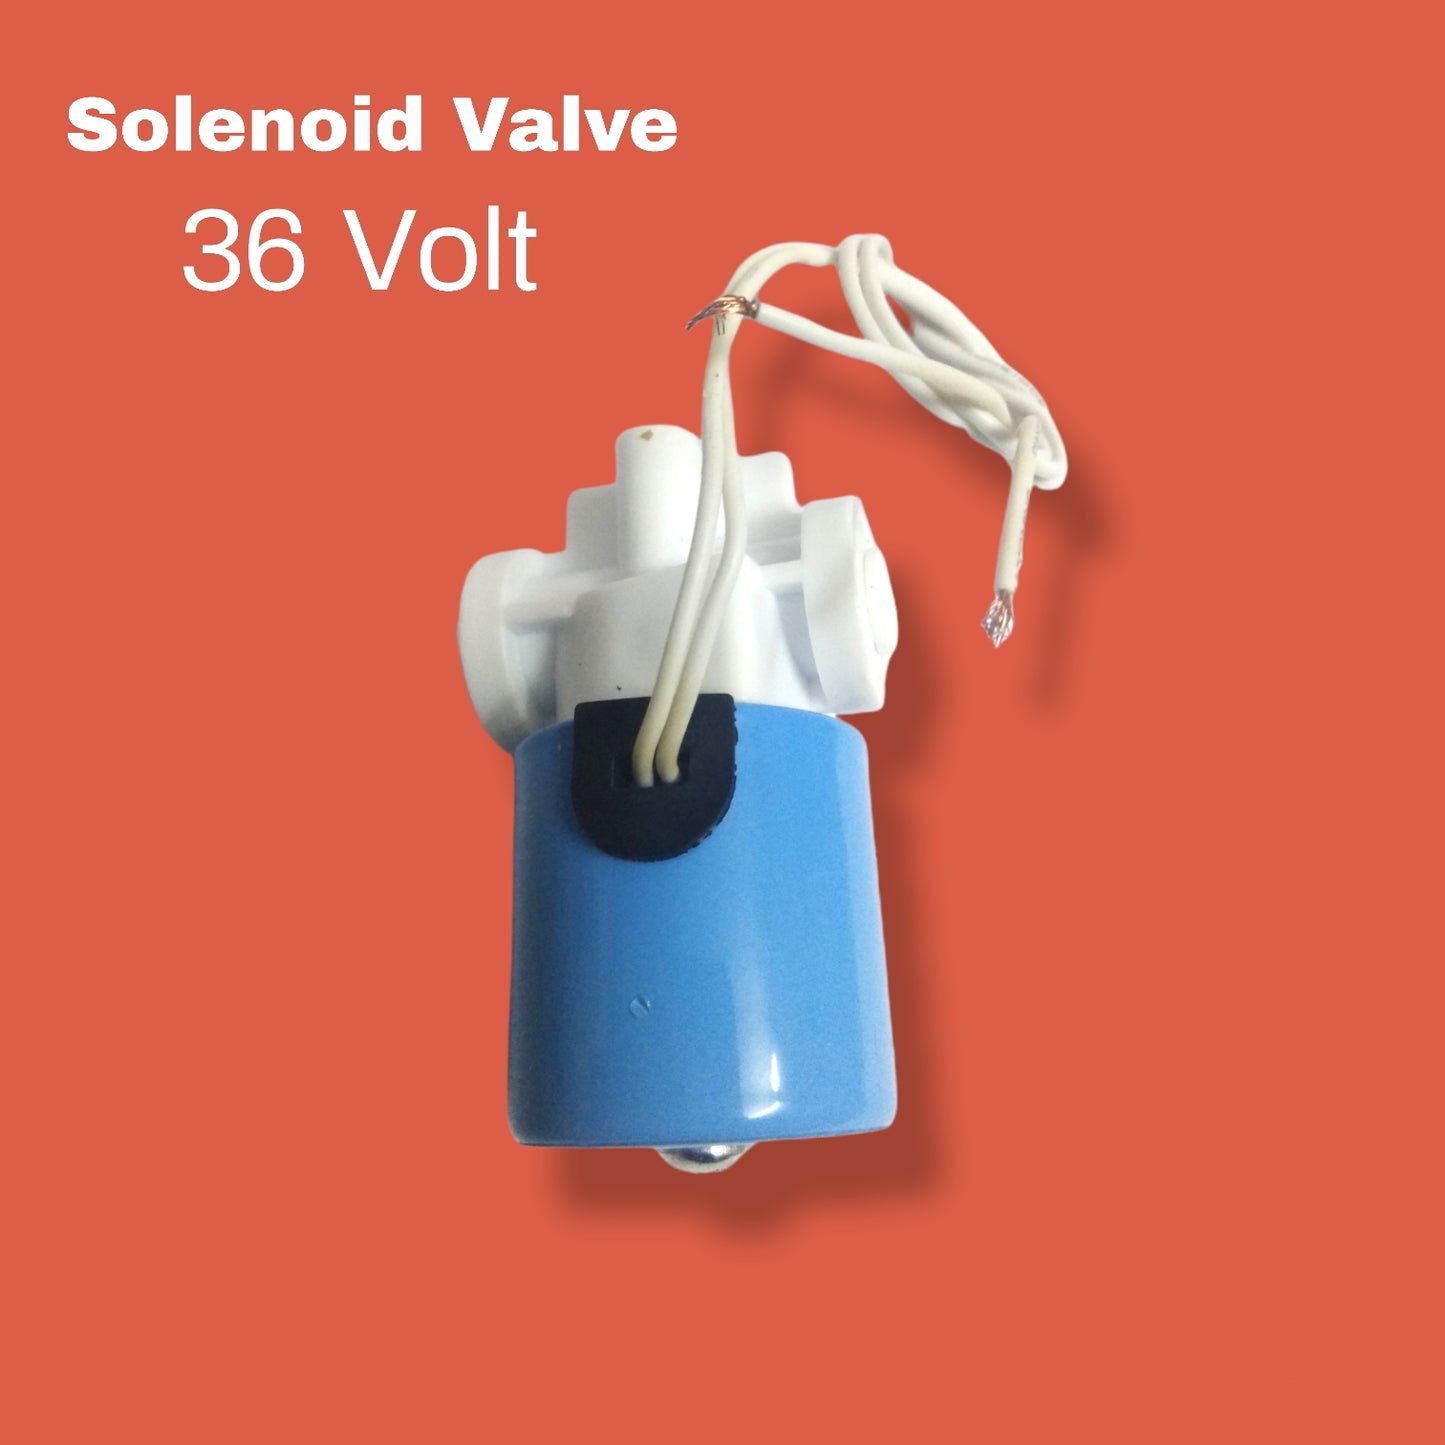 36 Volt DC Solenoid Valve suitable for Domestic RO System.